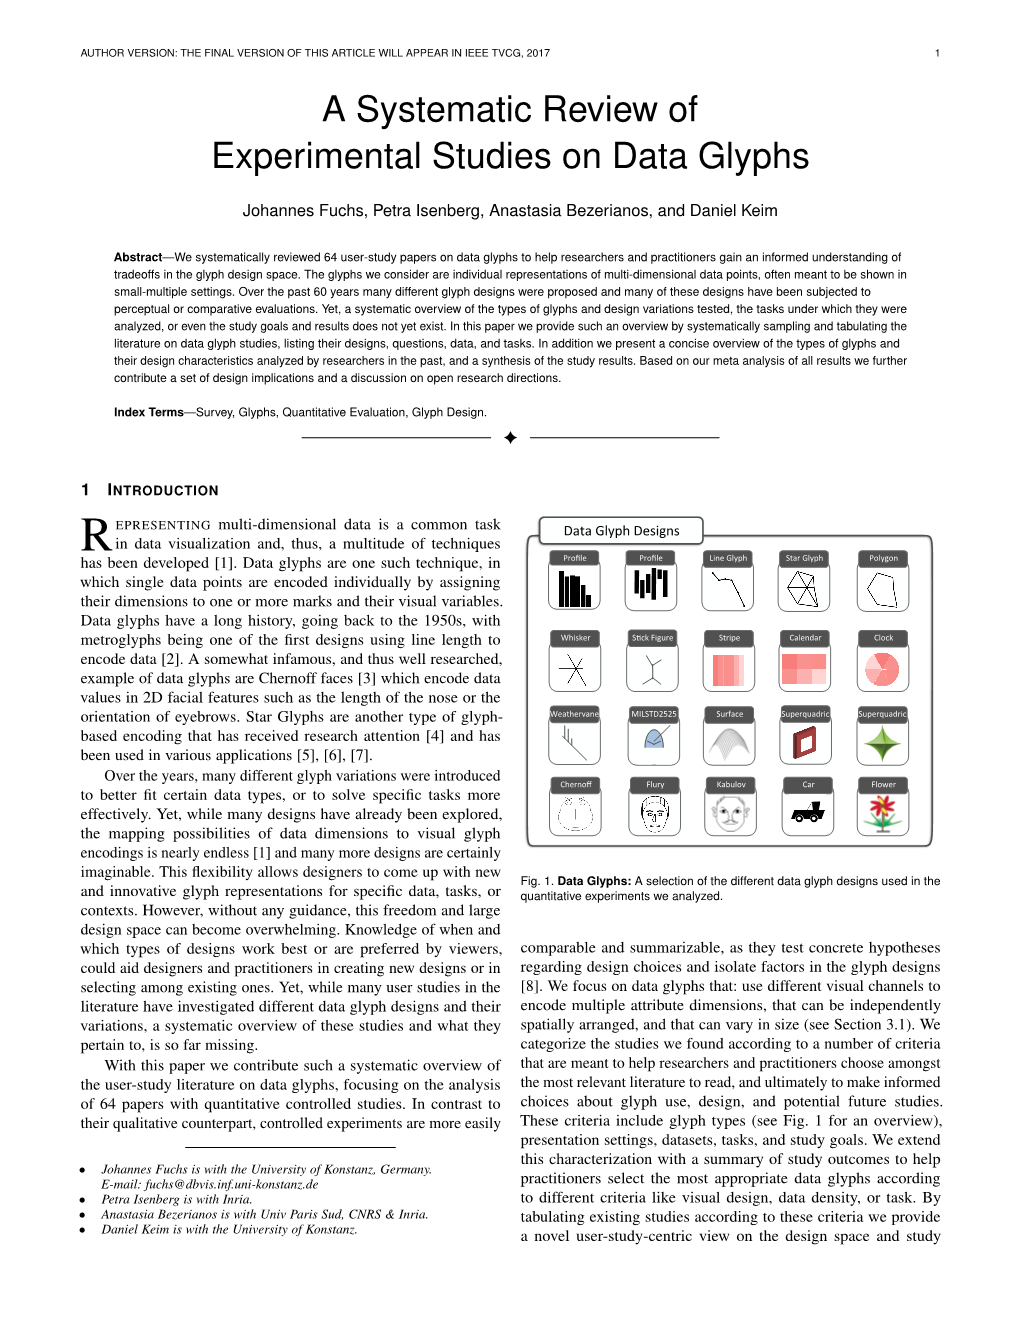 A Systematic Review of Experimental Studies on Data Glyphs